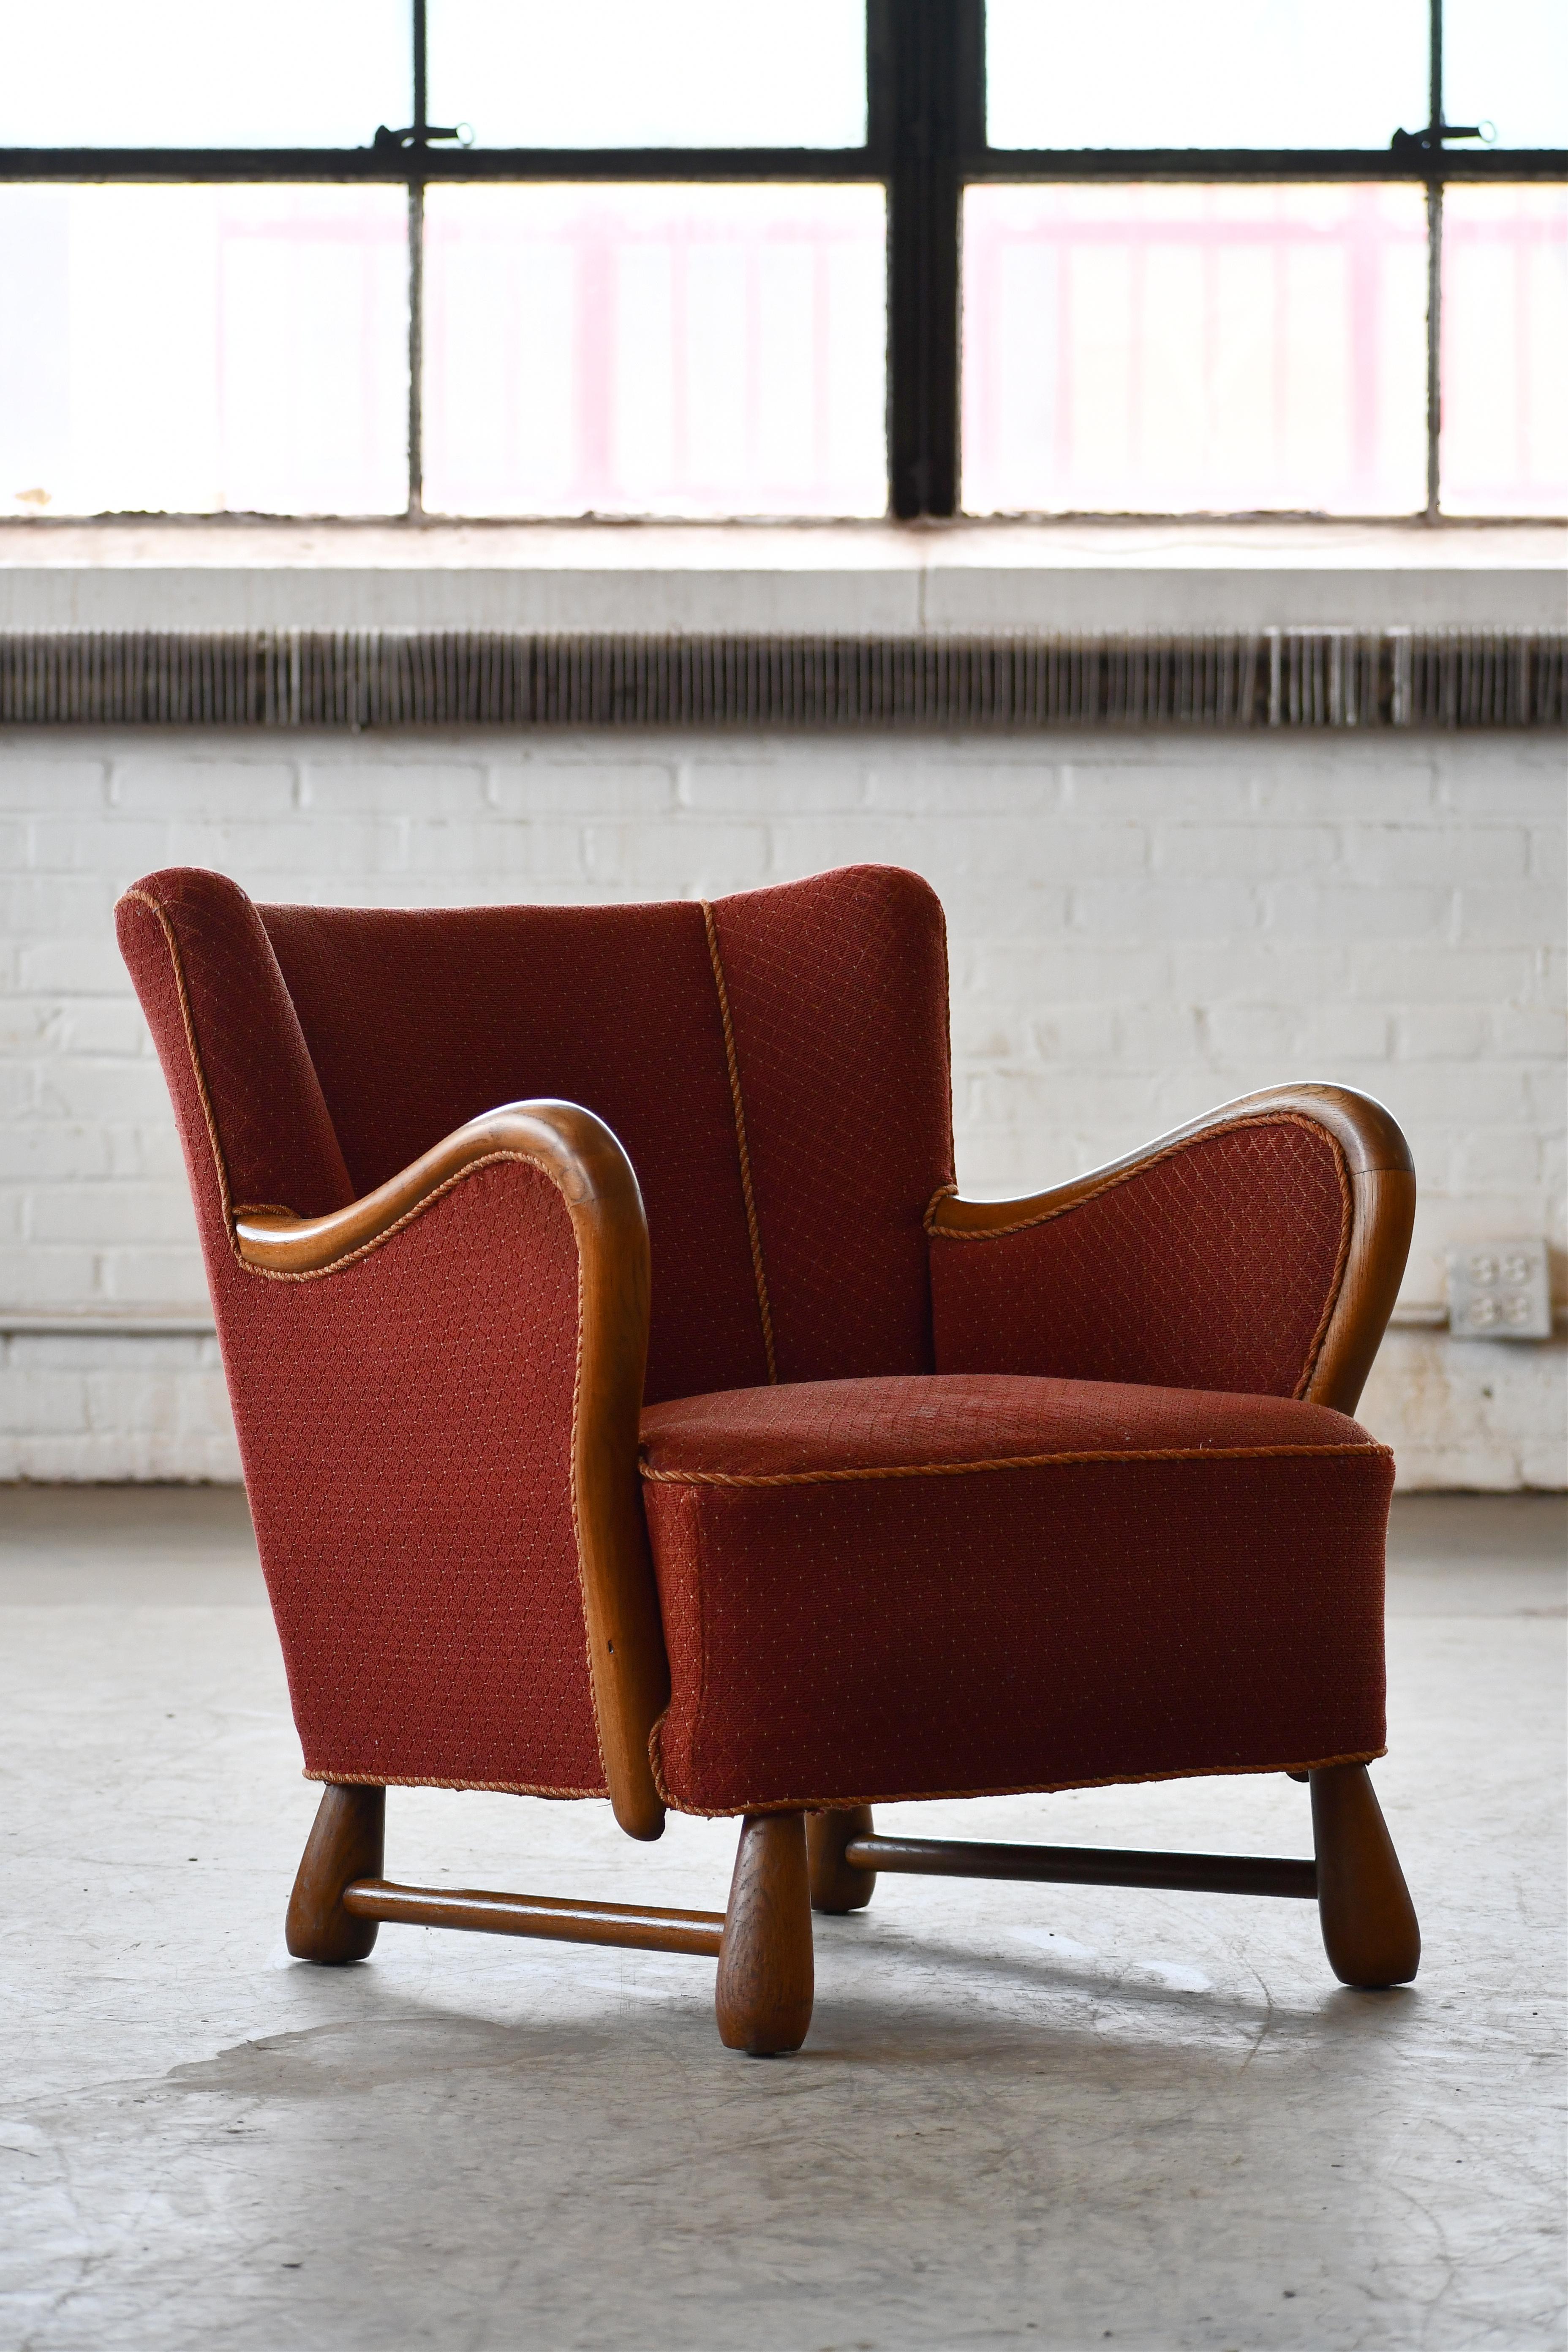 Mid-Century Modern Rare Danish Easy Lounge Chair in Mahogany Attributed to Otto Færge, 1940's For Sale